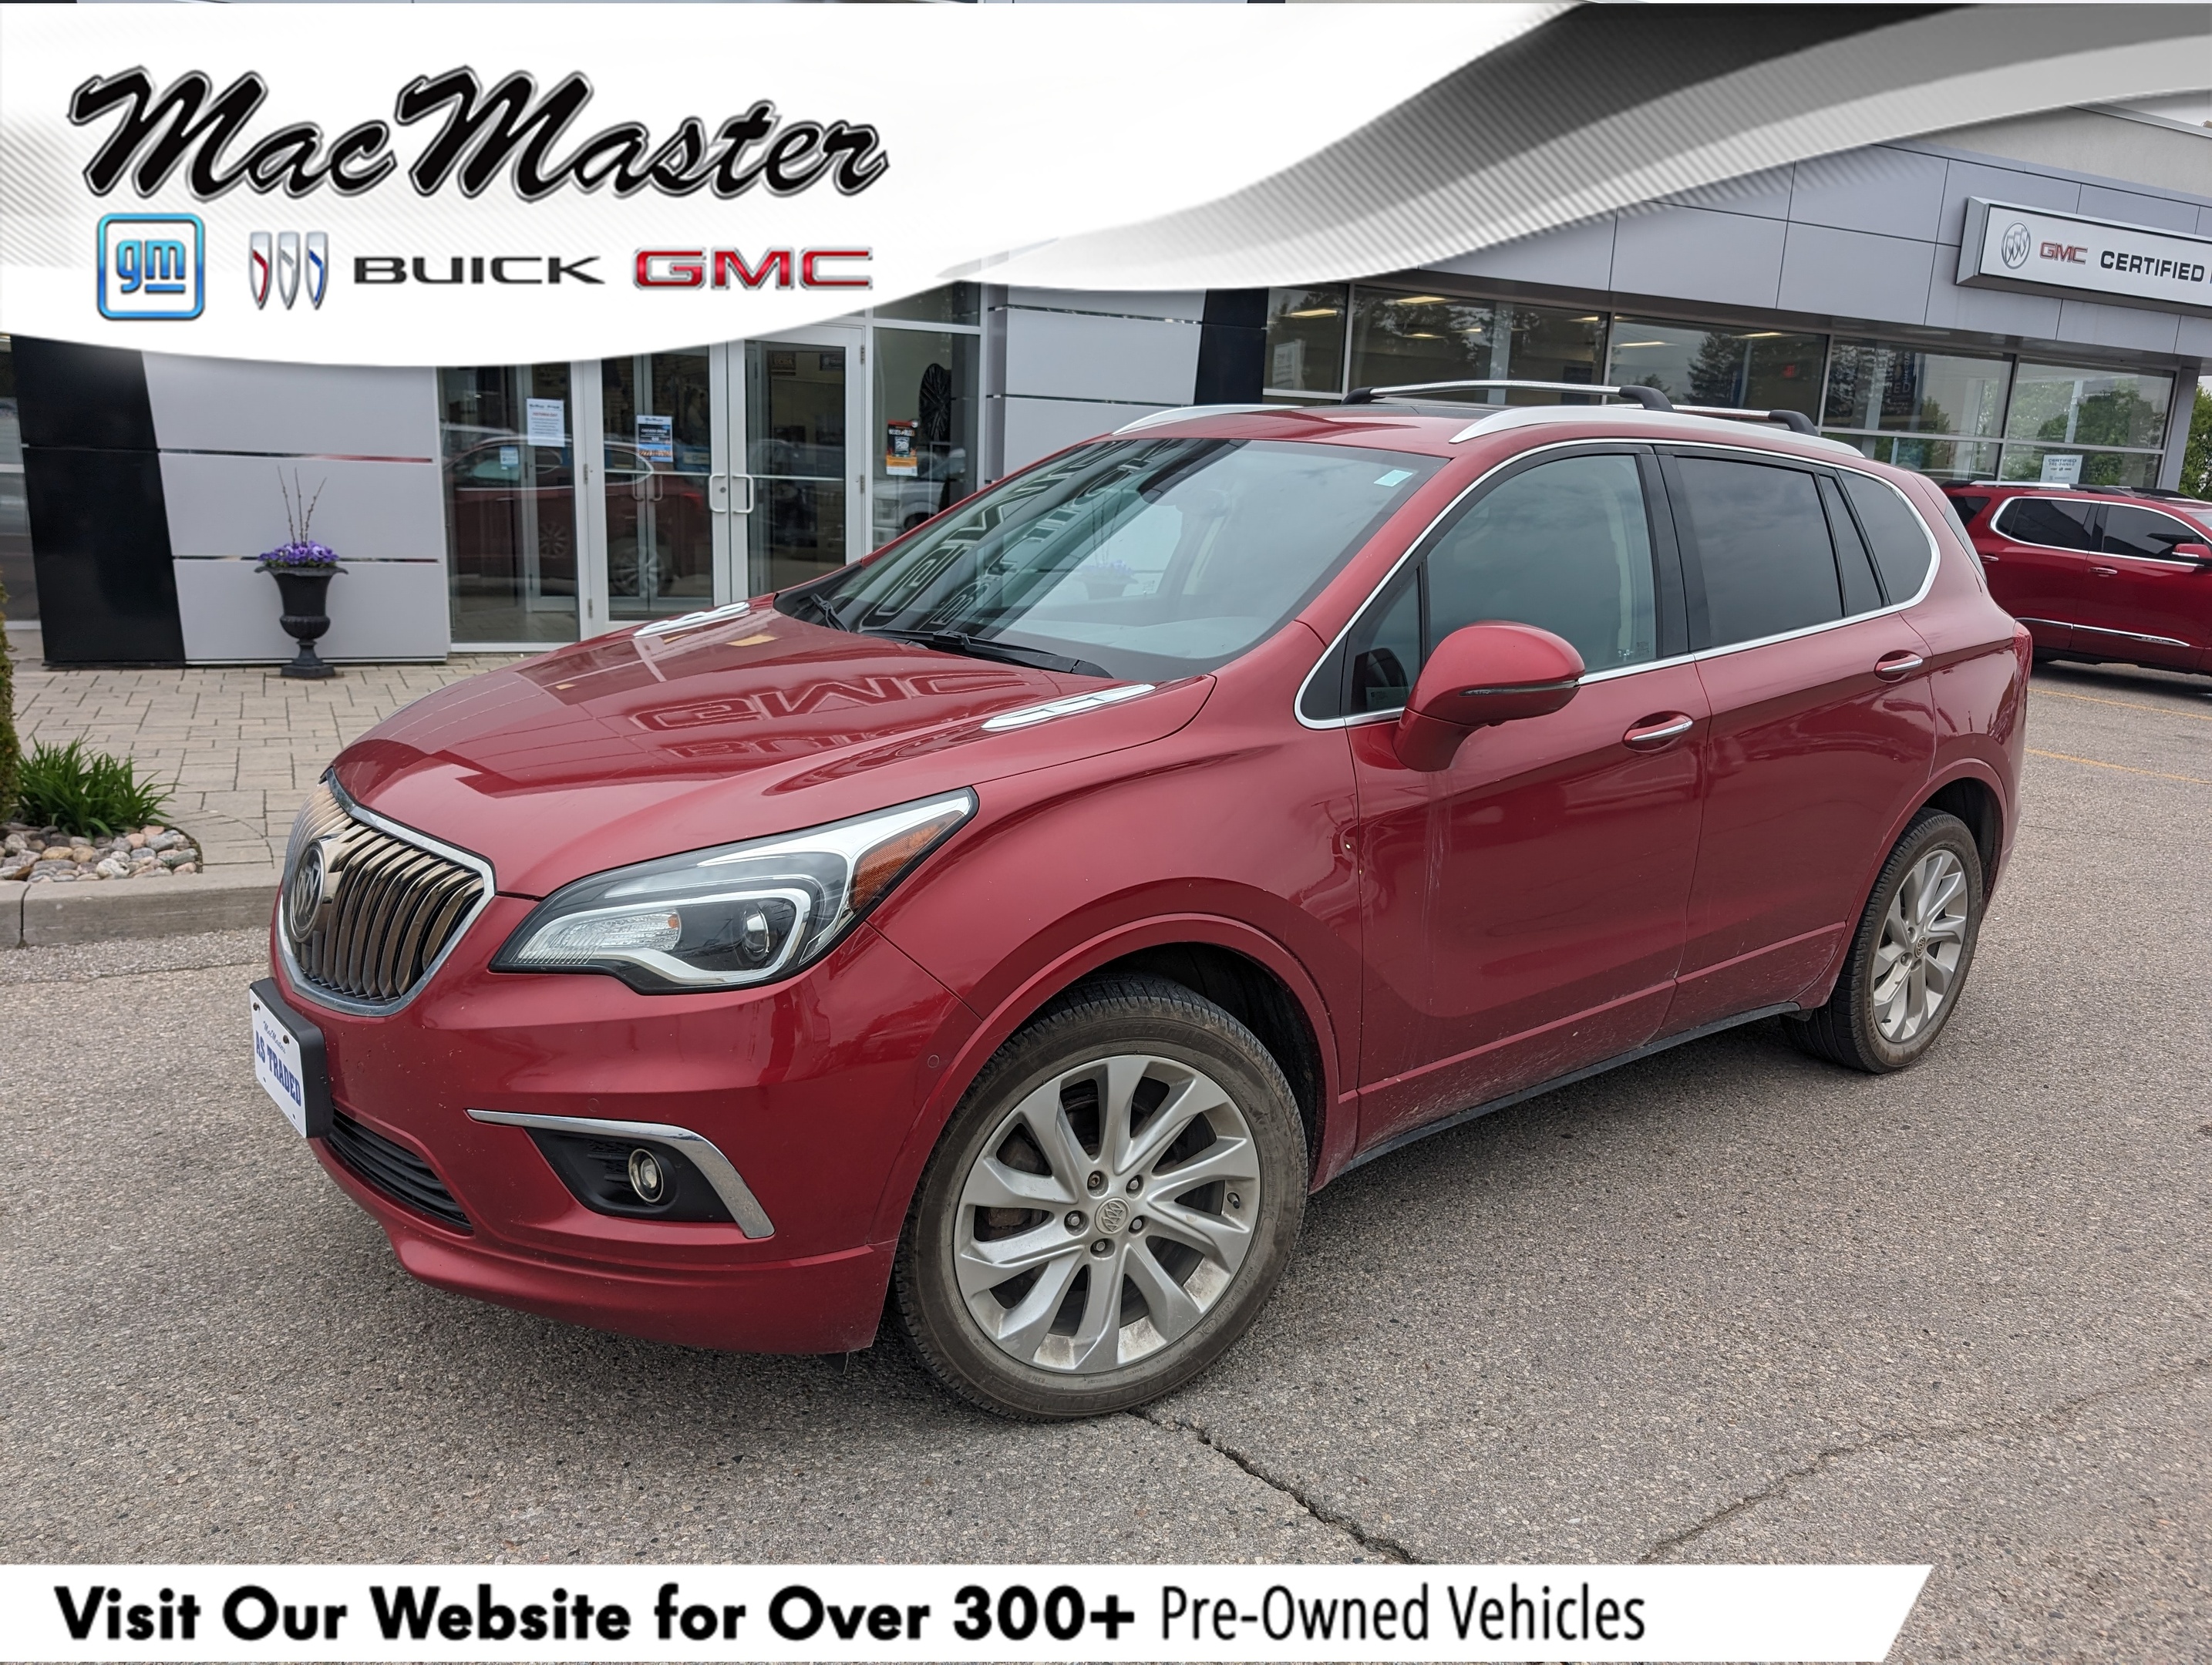 2016 Buick Envision PREMIUM II AWD, 2.0T, NAV, ROOF, 1-OWNER, AS-IS!